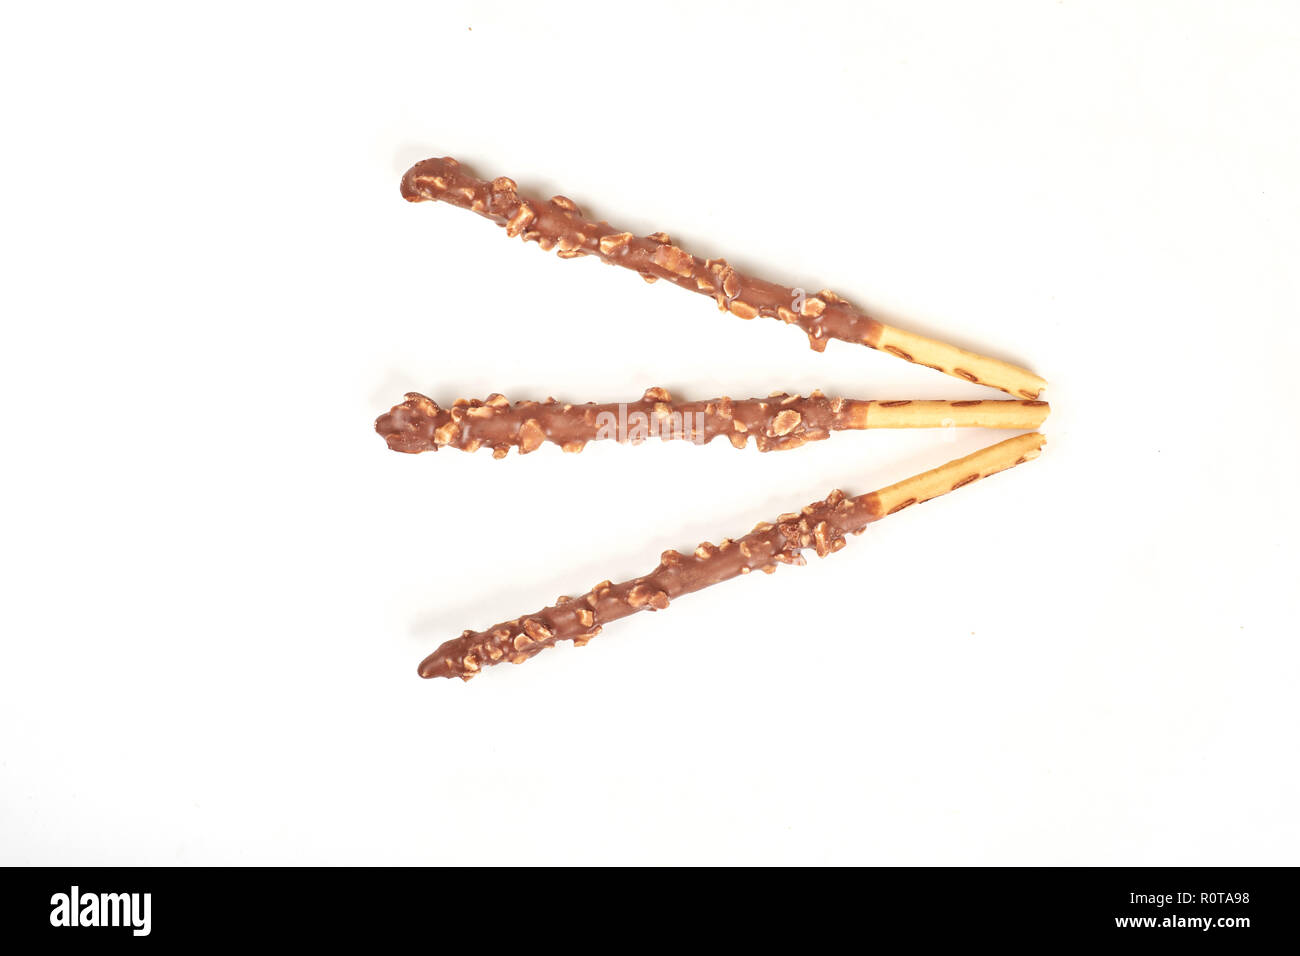 Biscuit stick with chocolate and almond on white background. Stock Photo